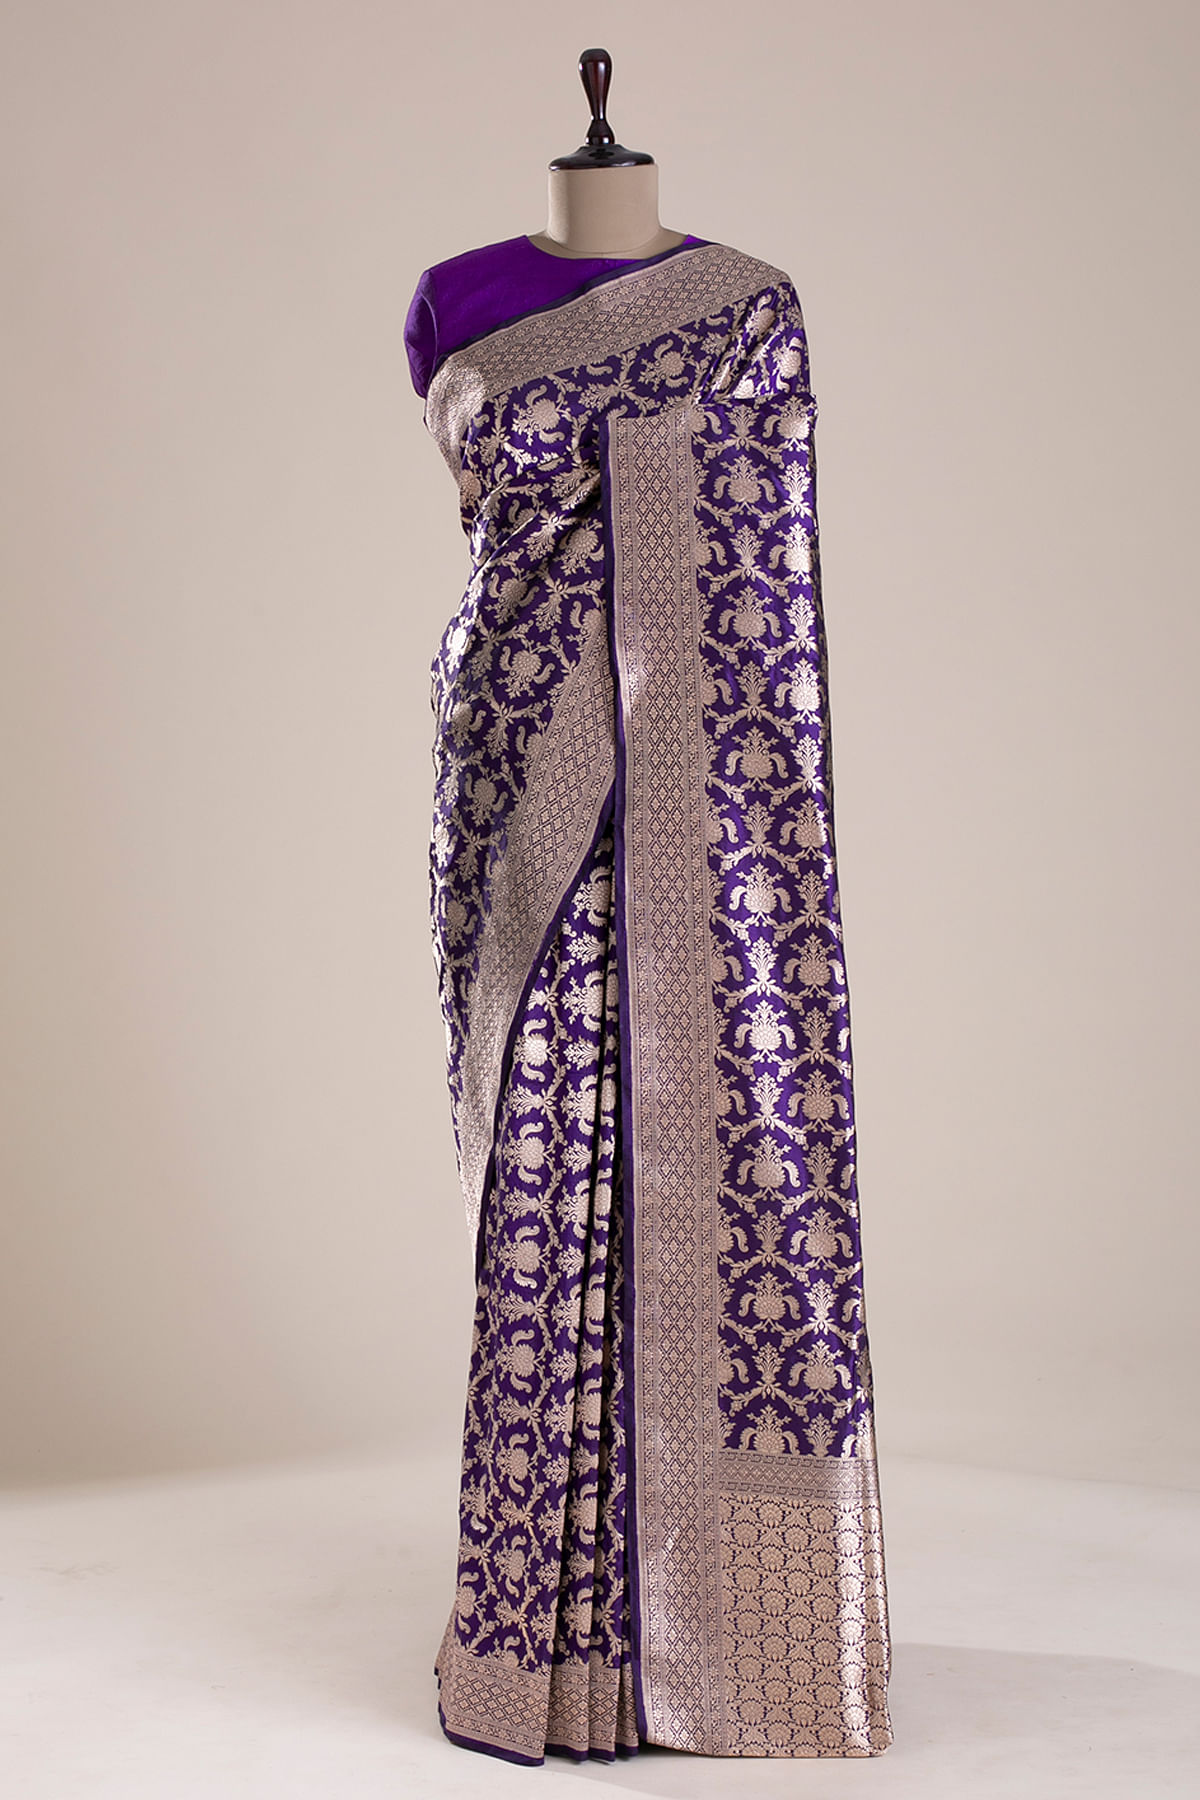 Nalli - The gorgeous soft silk sarees are the perfect pick for any